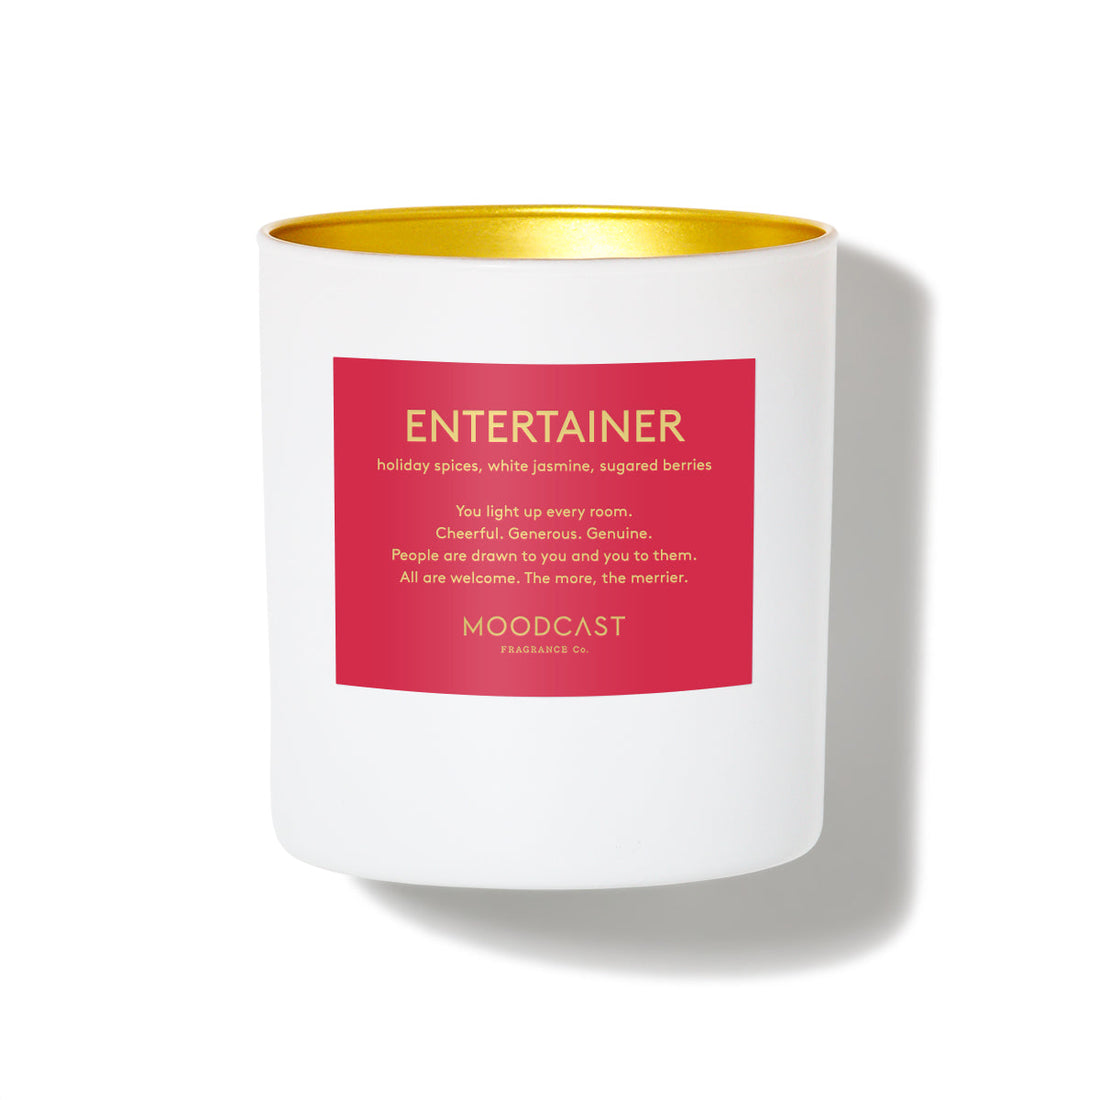 Entertainer - Persona Collection (White & Gold) - 8oz/227g Coconut Wax Blend Glass Jar Candle - Key Notes: Holiday Spices, White Jasmine, Sugared Berries